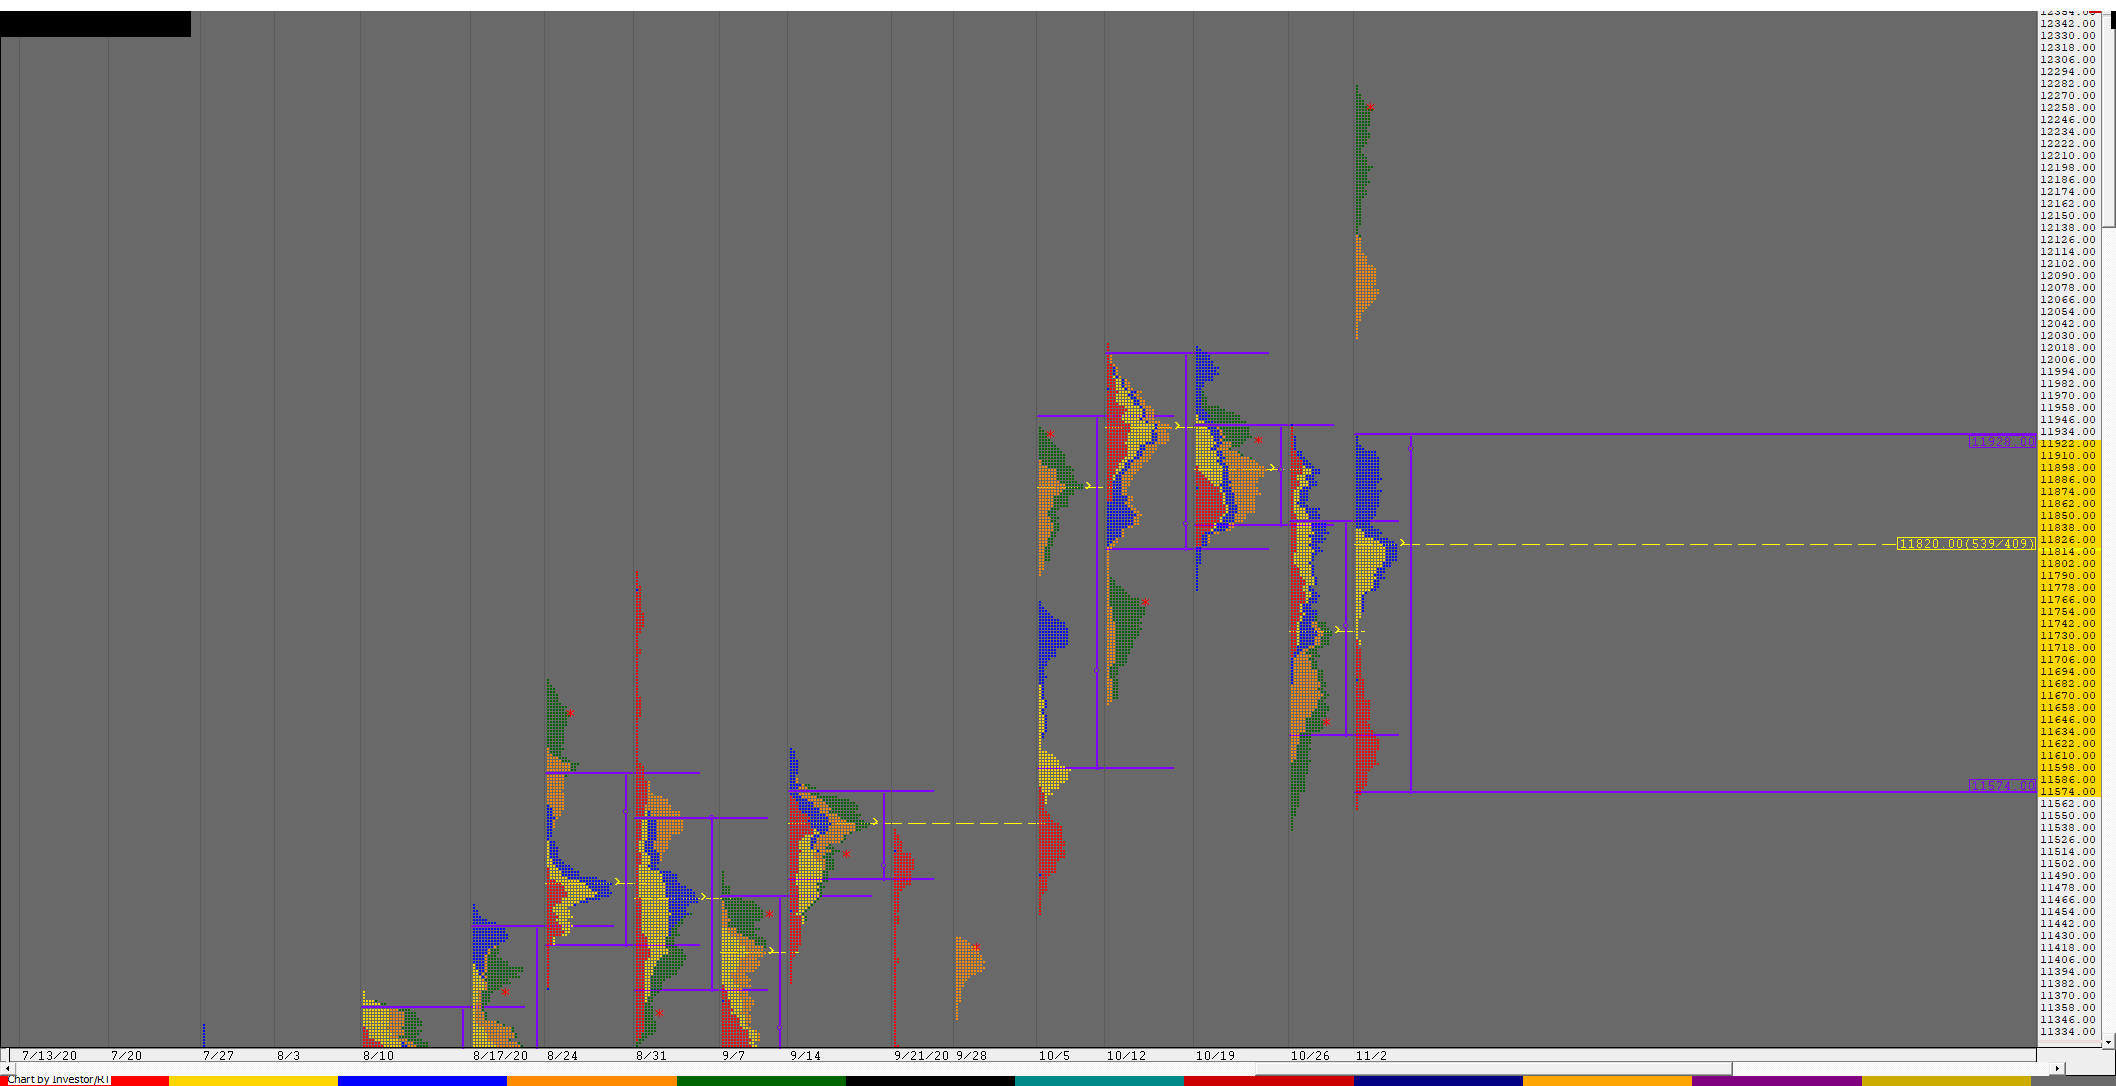 N Weekly 1 Weekly Charts (02Nd To 06Th November 2020) And Market Profile Analysis Banknifty Futures, Charts, Day Trading, Intraday Trading, Intraday Trading Strategies, Market Profile, Market Profile Trading Strategies, Nifty Futures, Order Flow Analysis, Support And Resistance, Technical Analysis